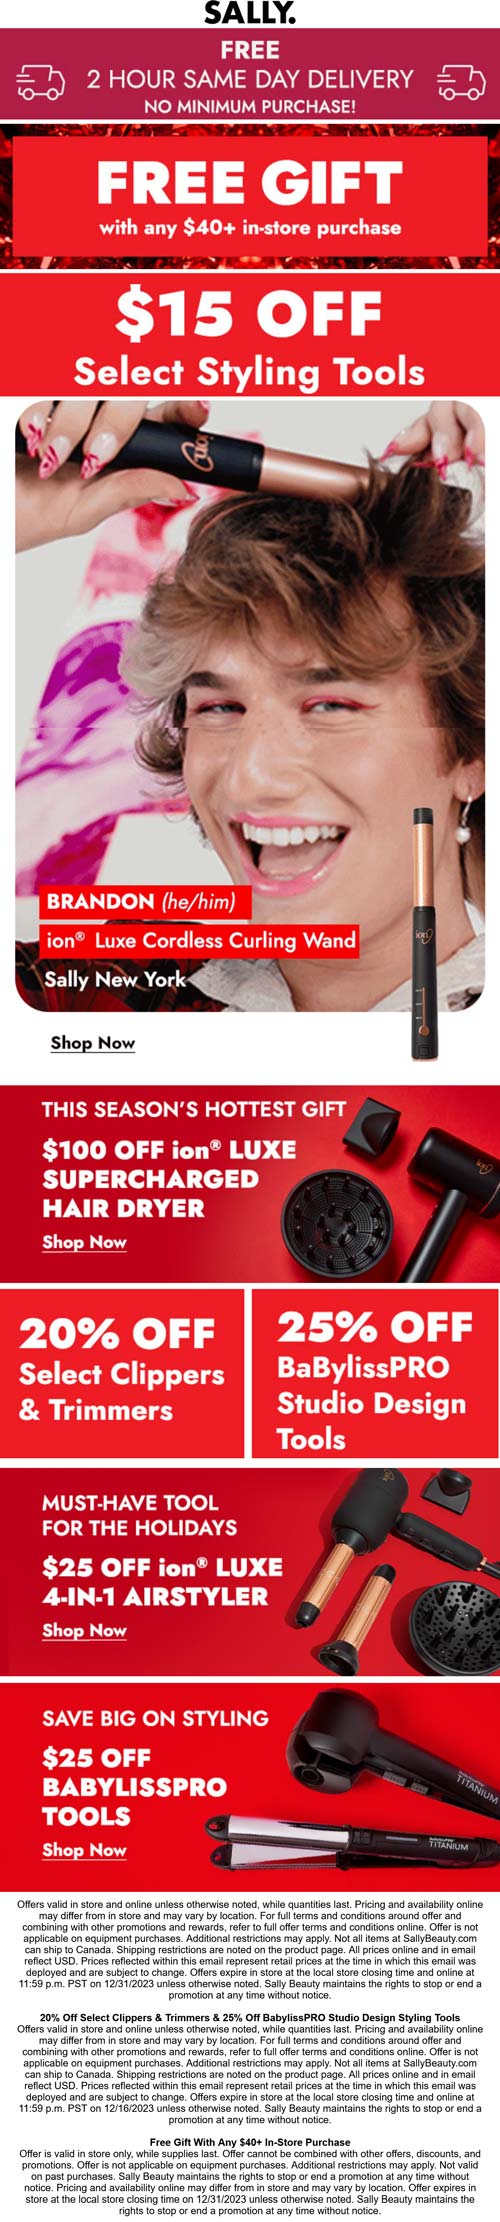 Free gift on $40, 25% off BabylissPRO & more at Sally beauty #sally